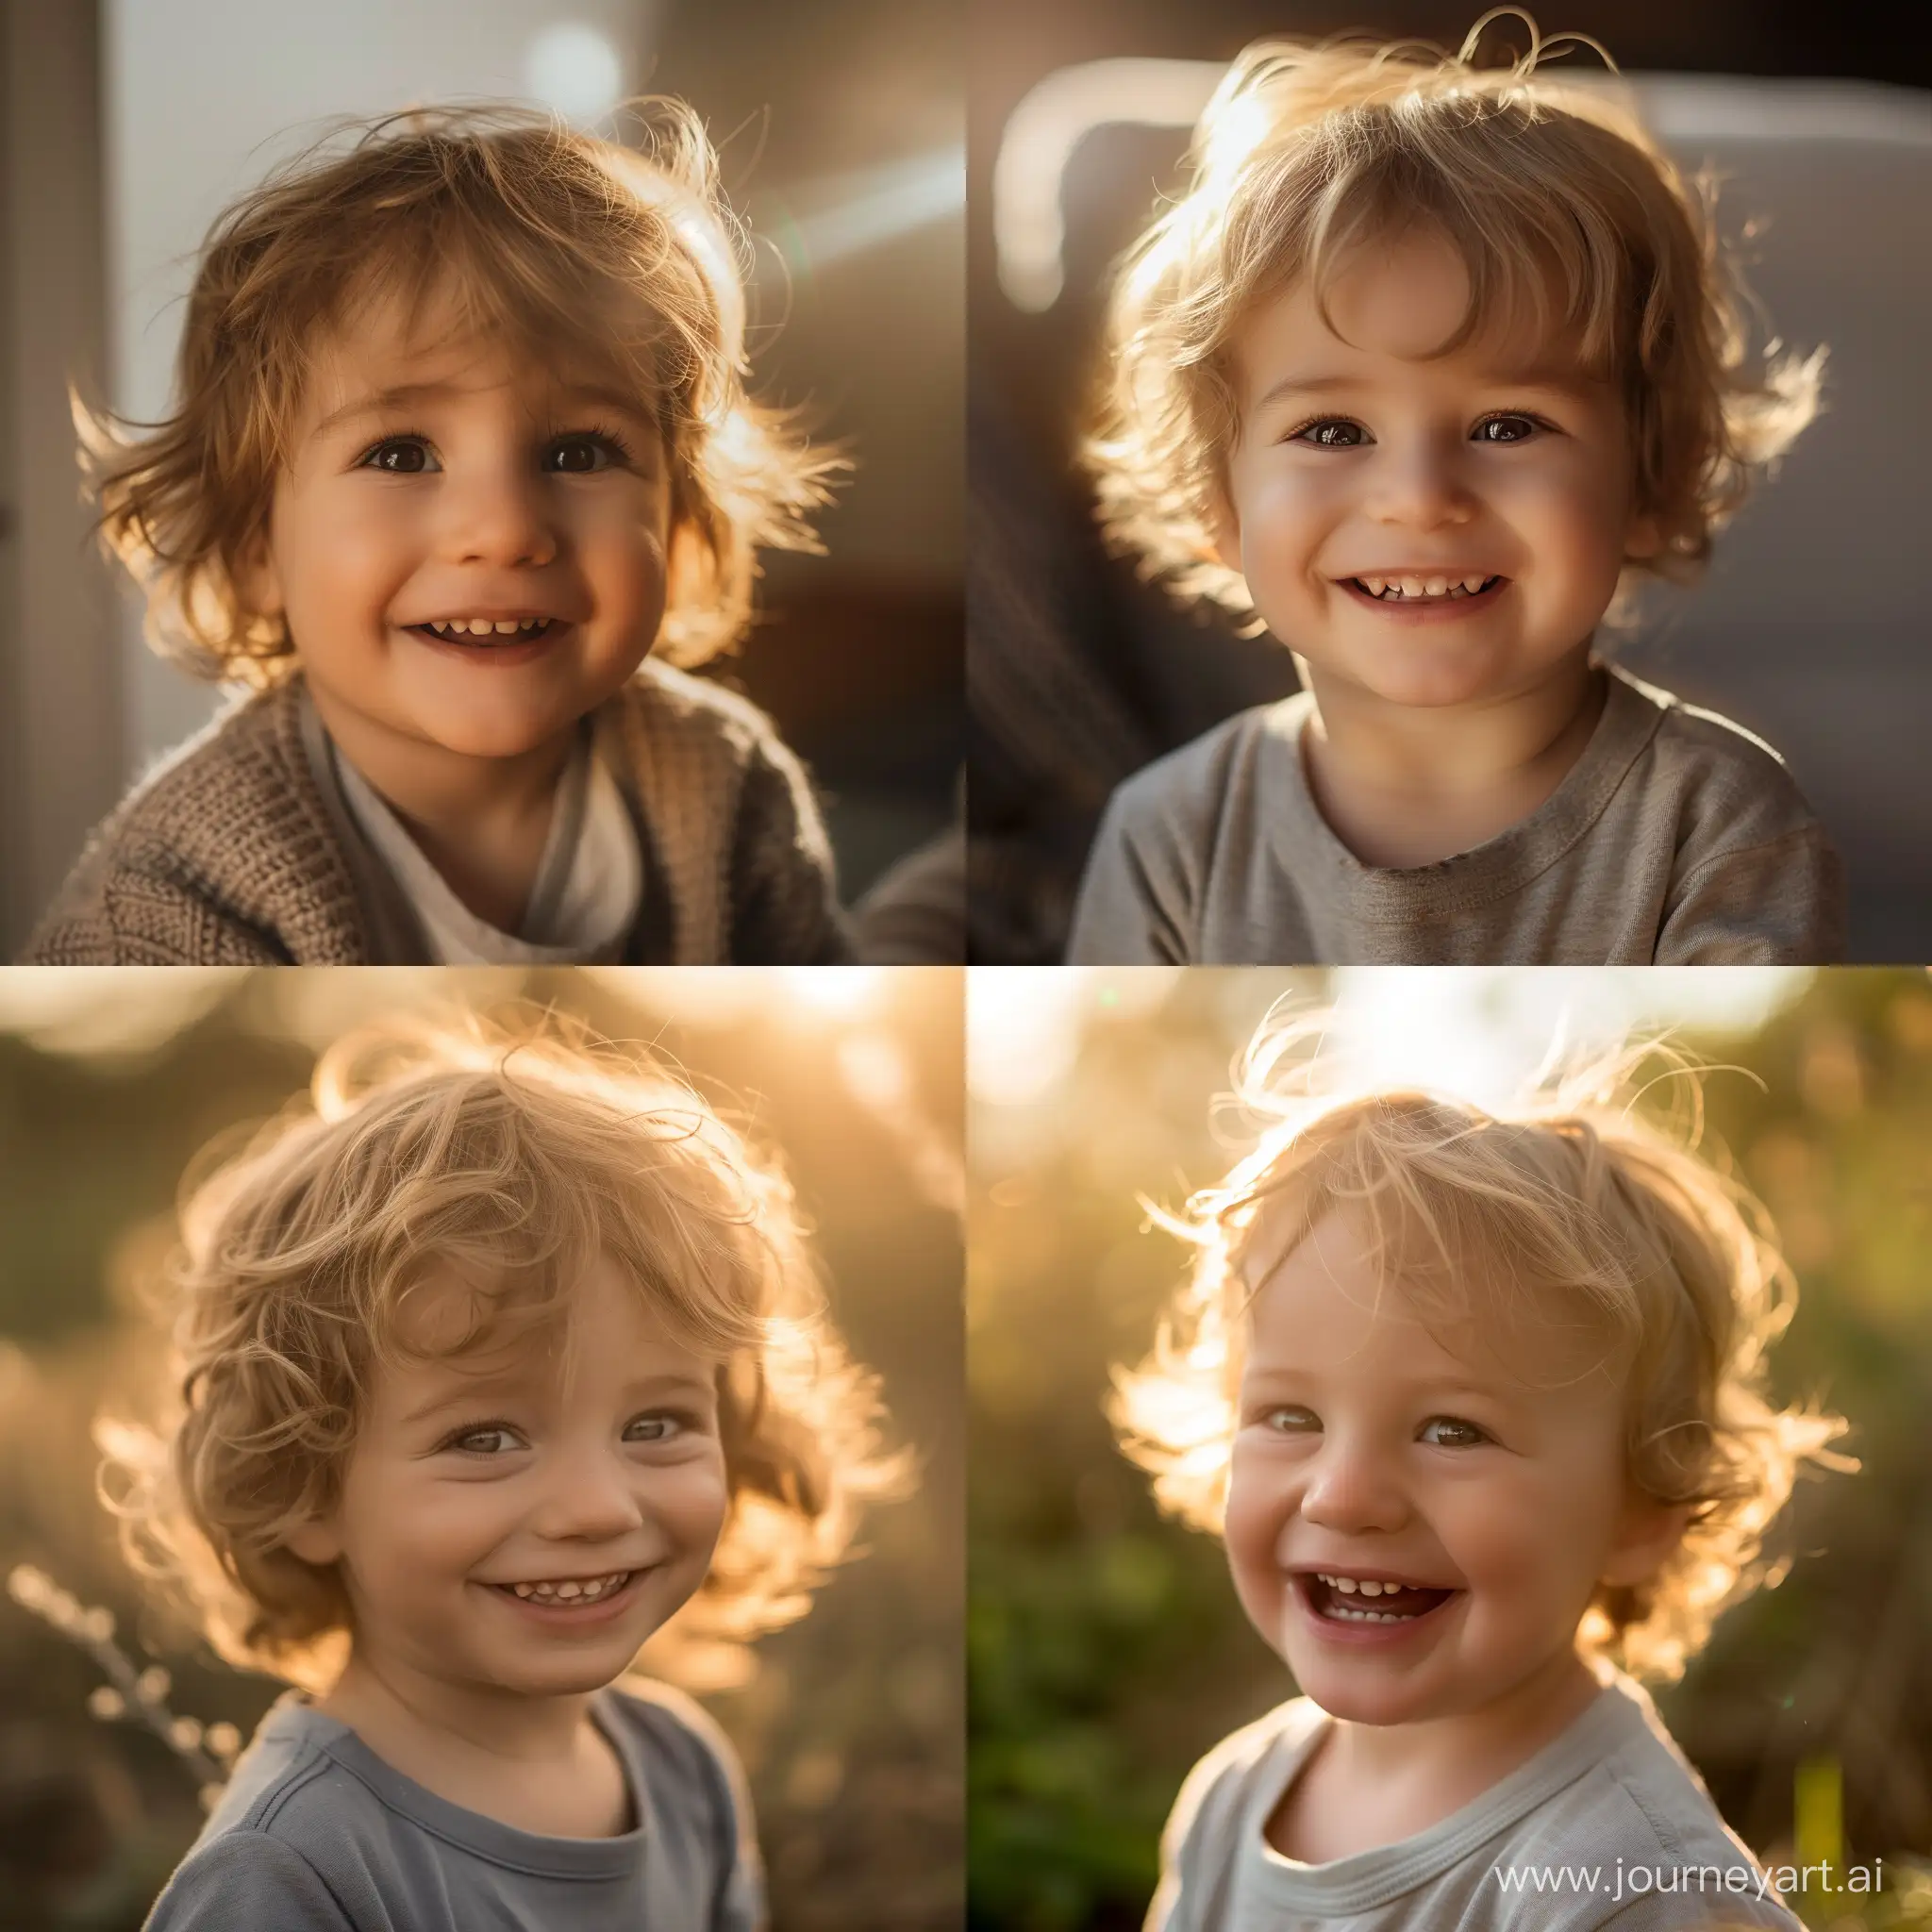 pLow angle shot of a smiling 2 year old boy. DSLR, very realistic, morning light shining through his hair